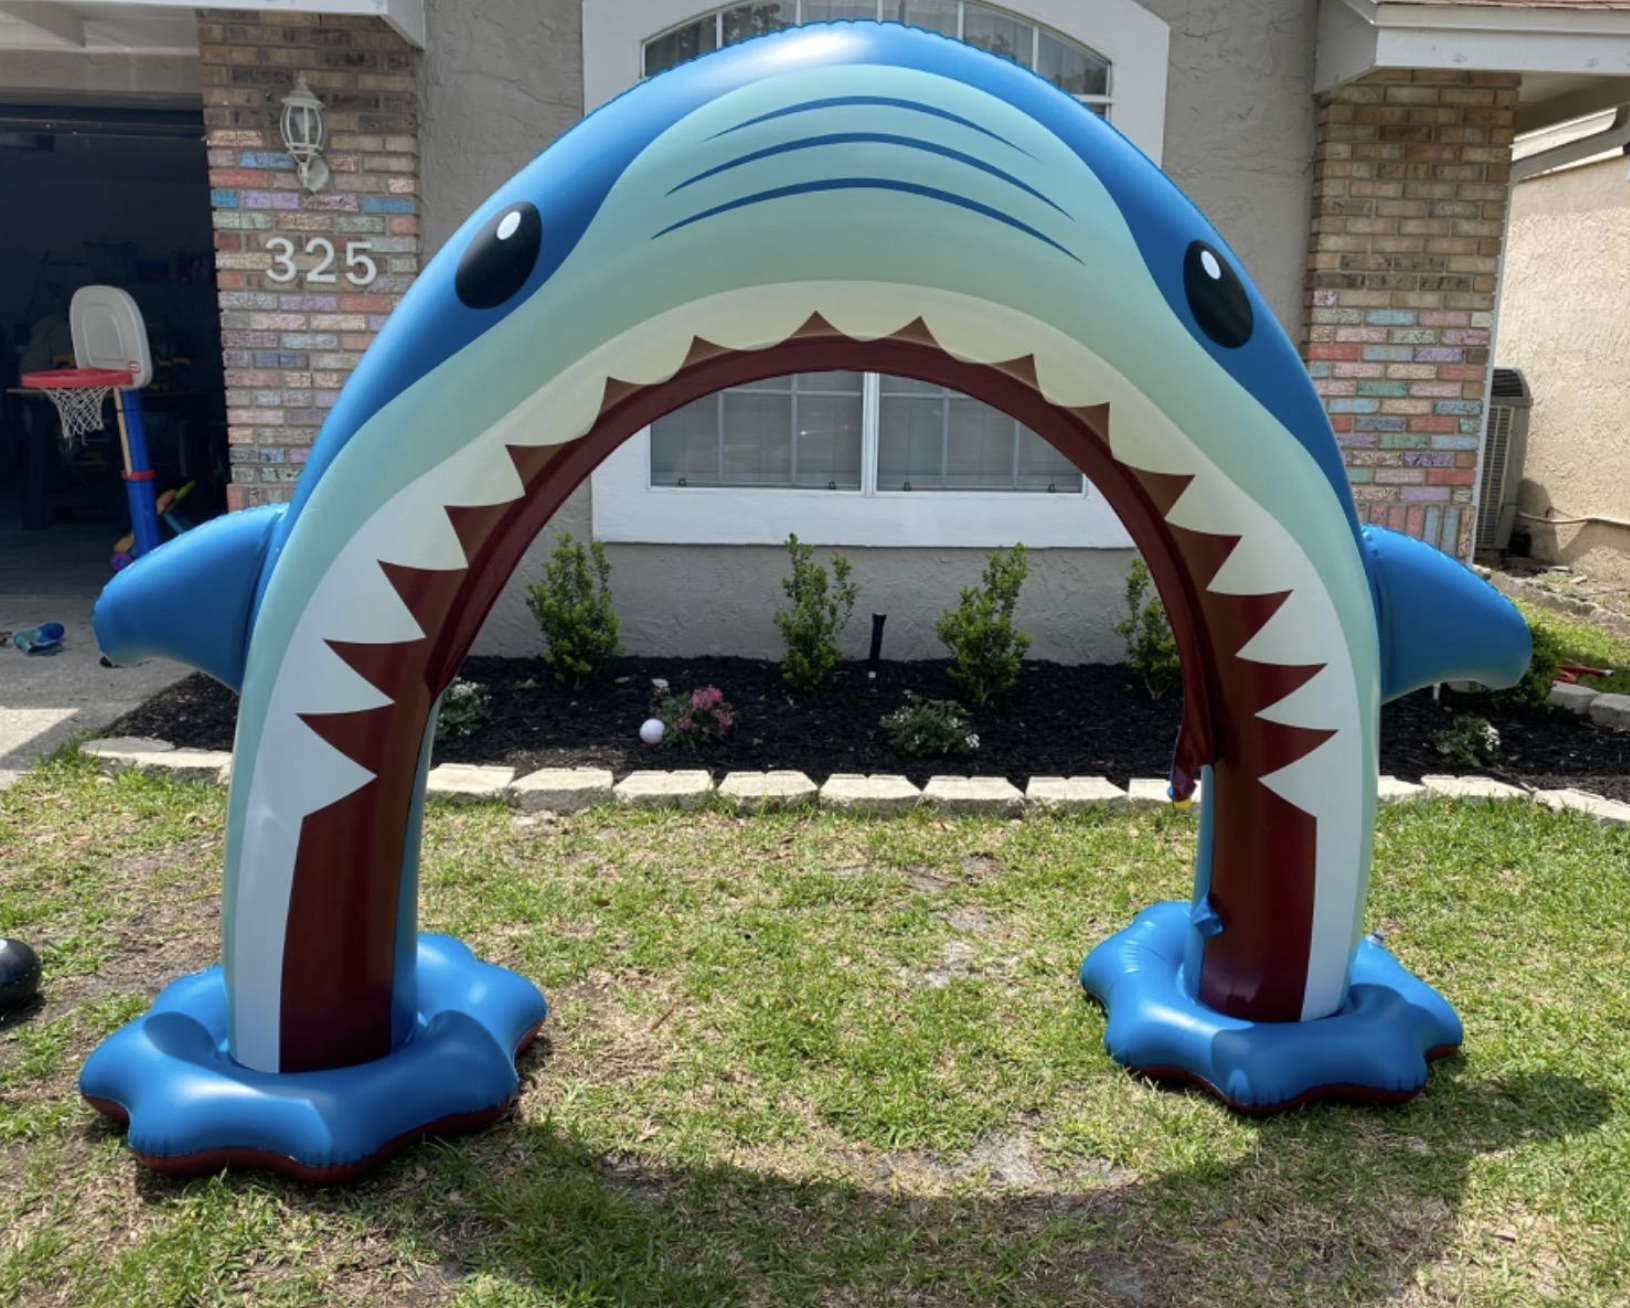 reviewer photo of the inflatable shark sprinkler